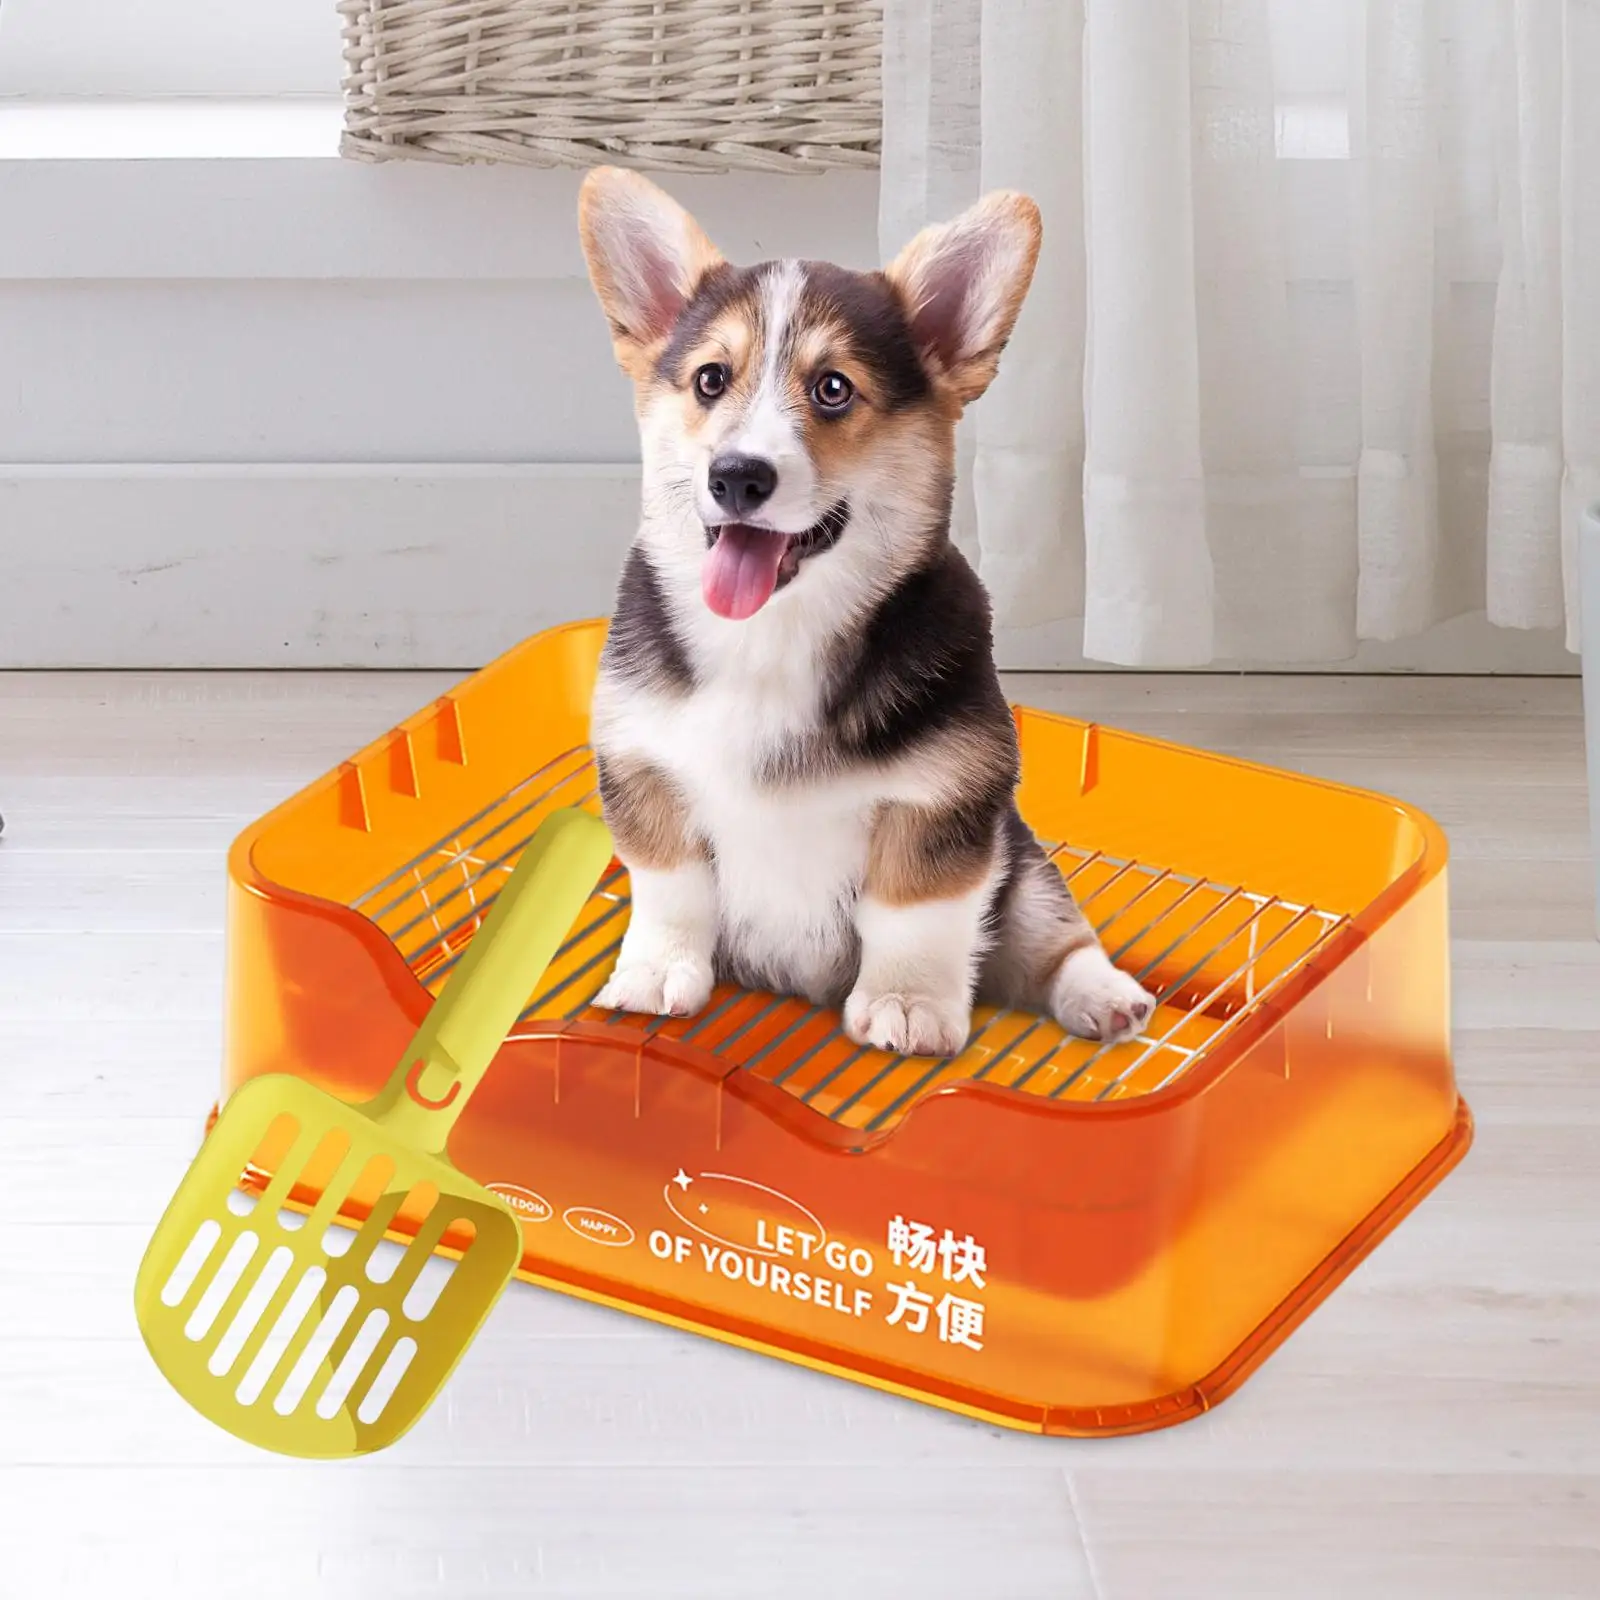 Dog Toilet Puppy Litter Box Toilette Portable with Scooper Dog Potty Tray